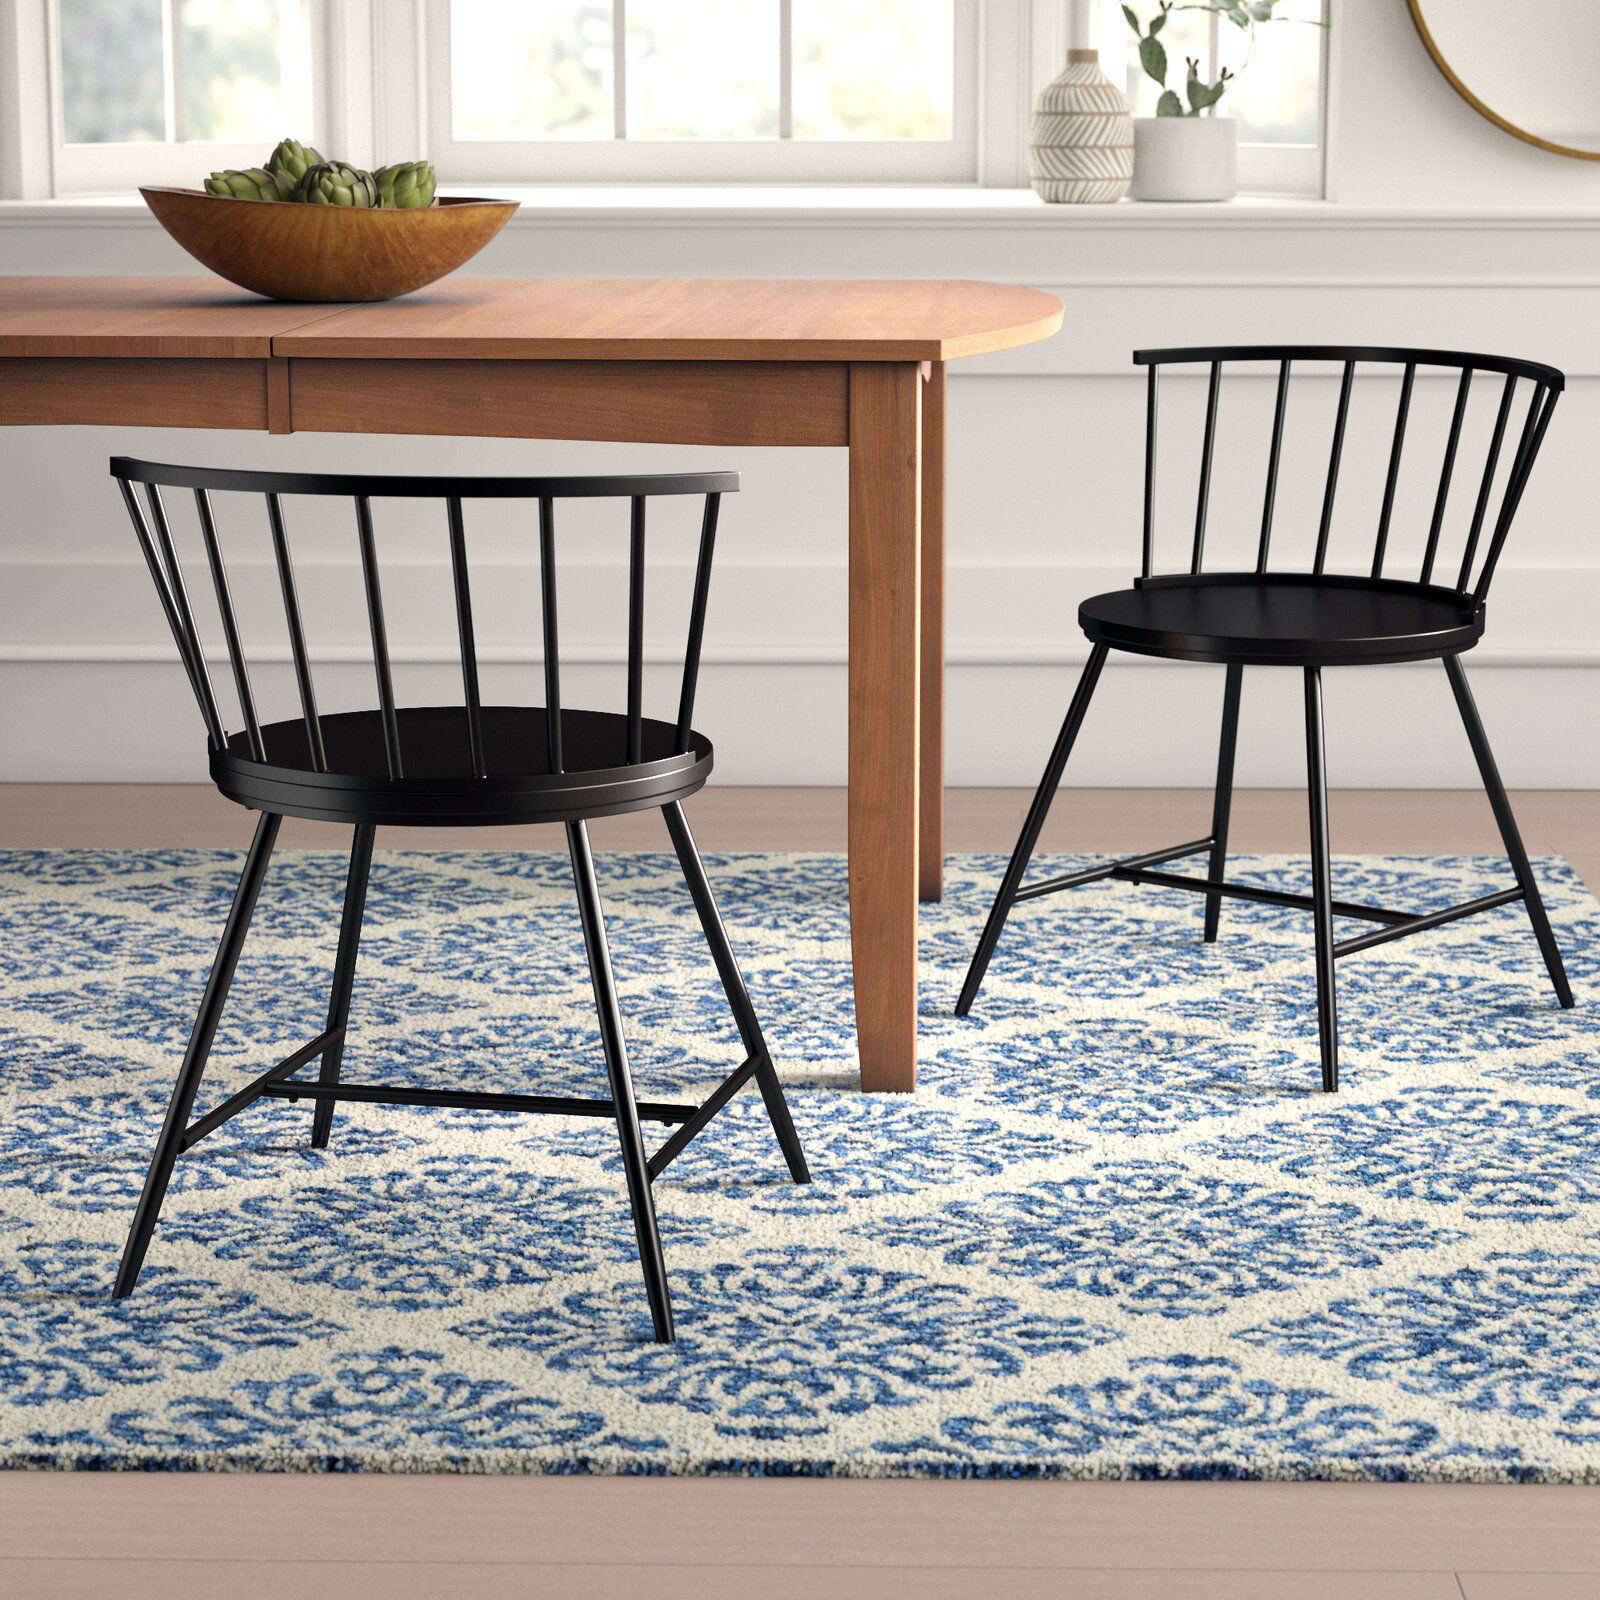 15 Dining Chairs to Fit Any Budget, Any Home